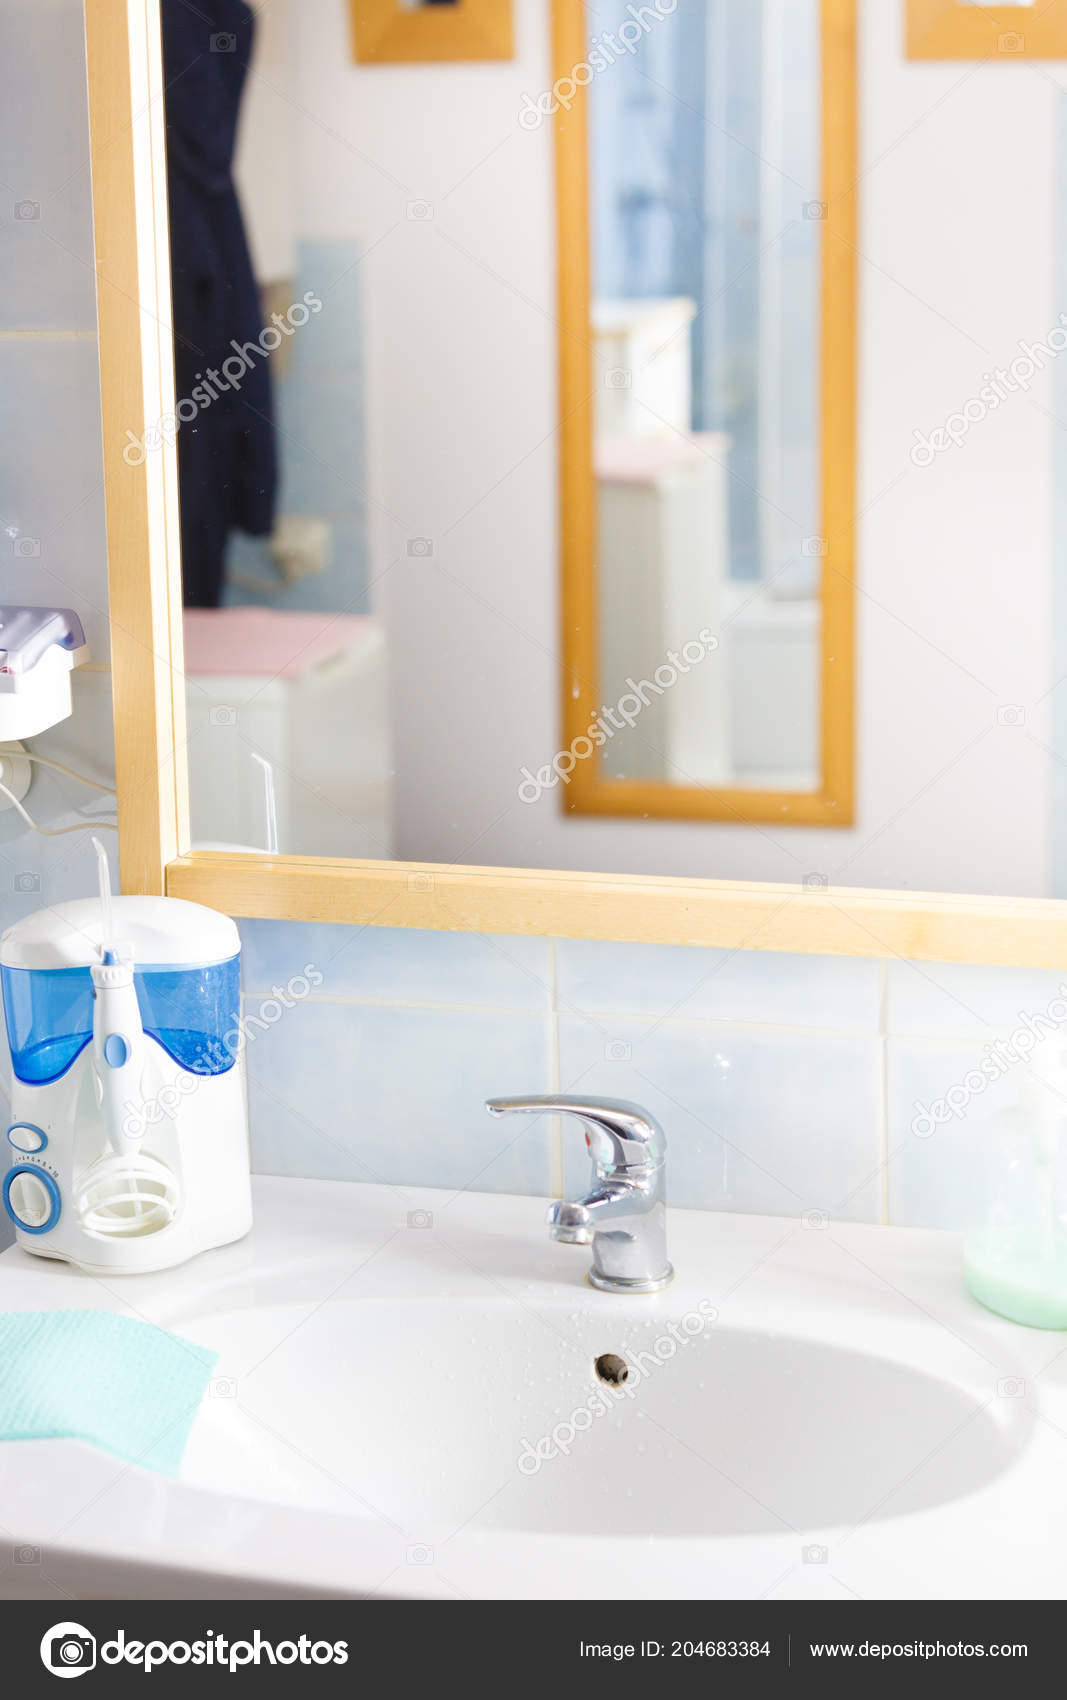 Bathroom Features Concept Sink Mirror Hygiene Objects Nobody